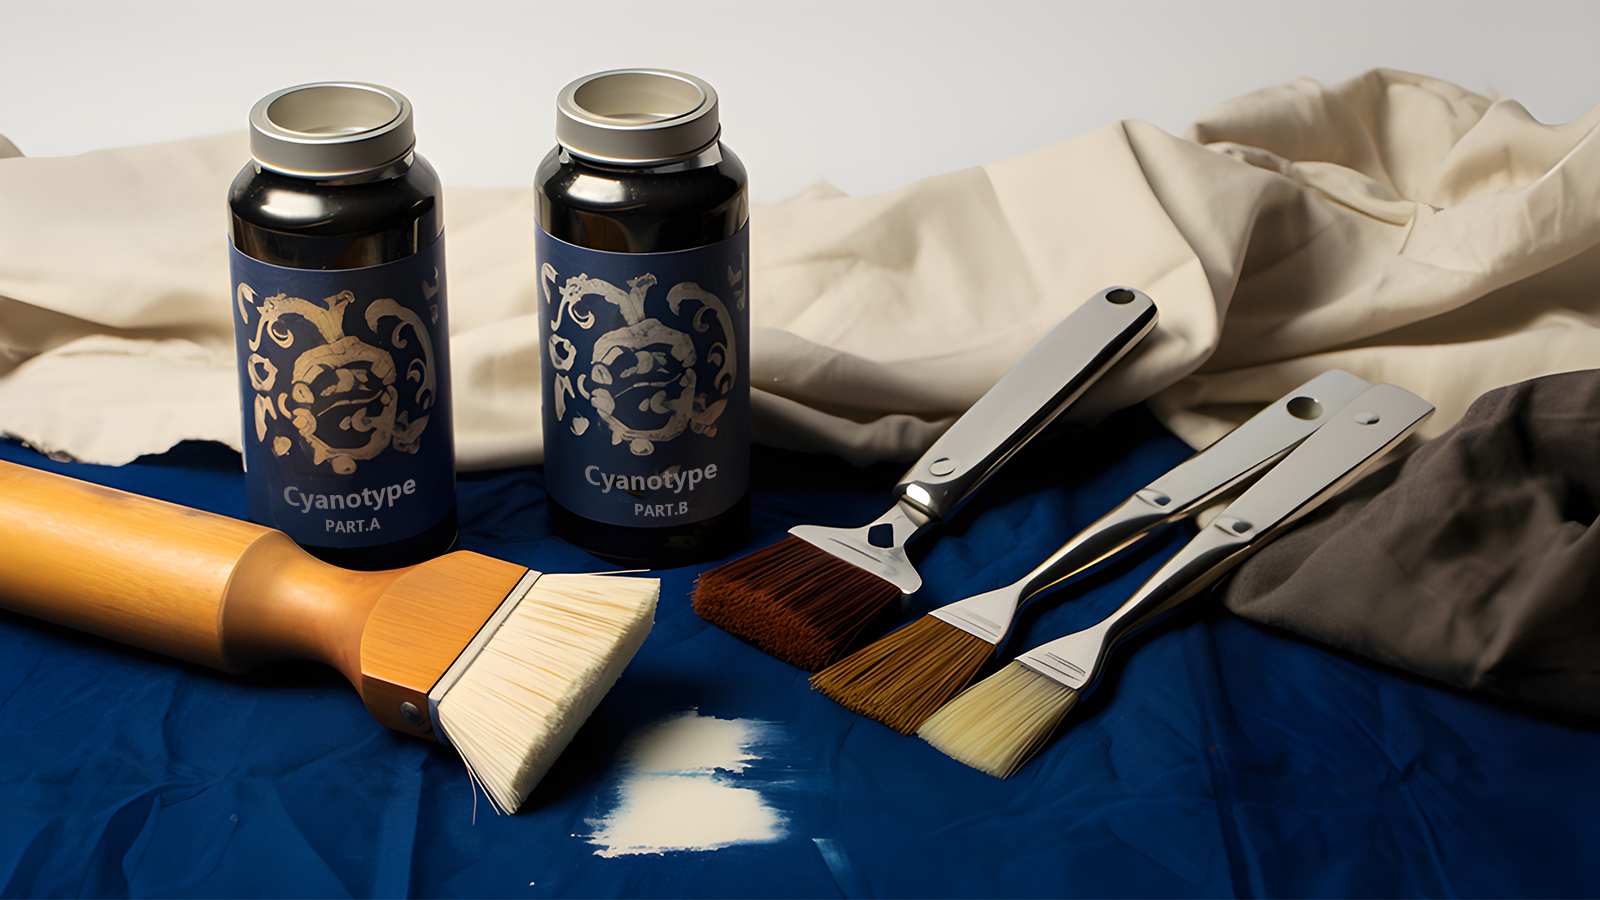 Gather the Cyanotype Supplies